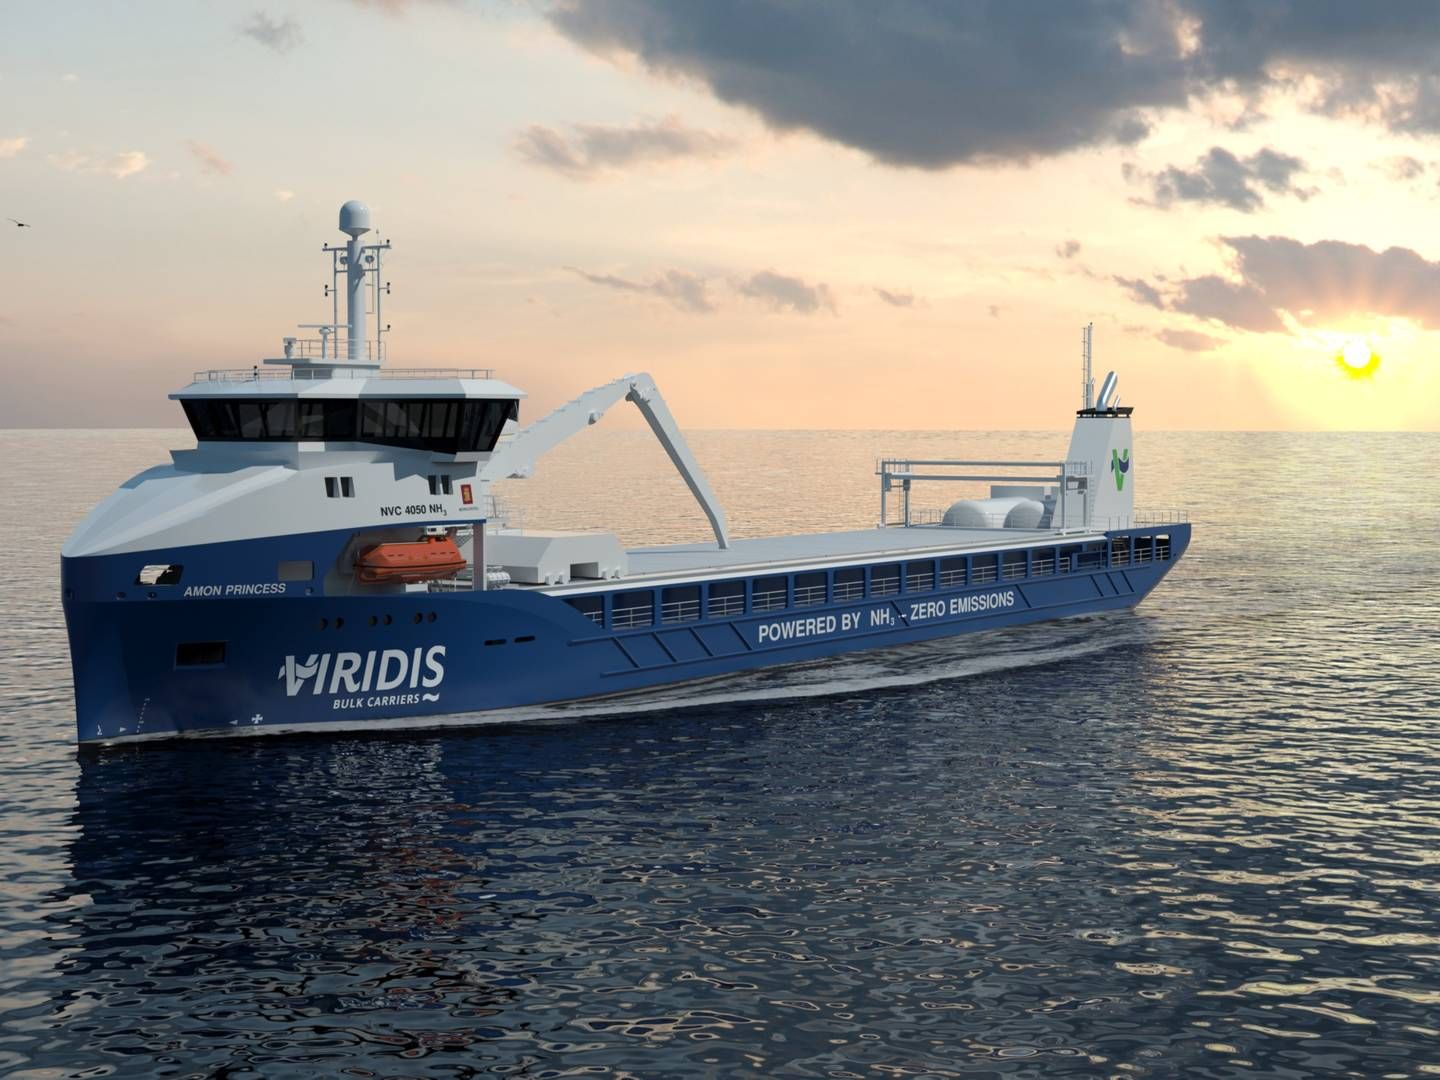 The company's planned ammonia vessels are expected to be ordered in 2023 and delivered from 2025. | Foto: Kongsberg Maritime / Viridis Bulk Carriers